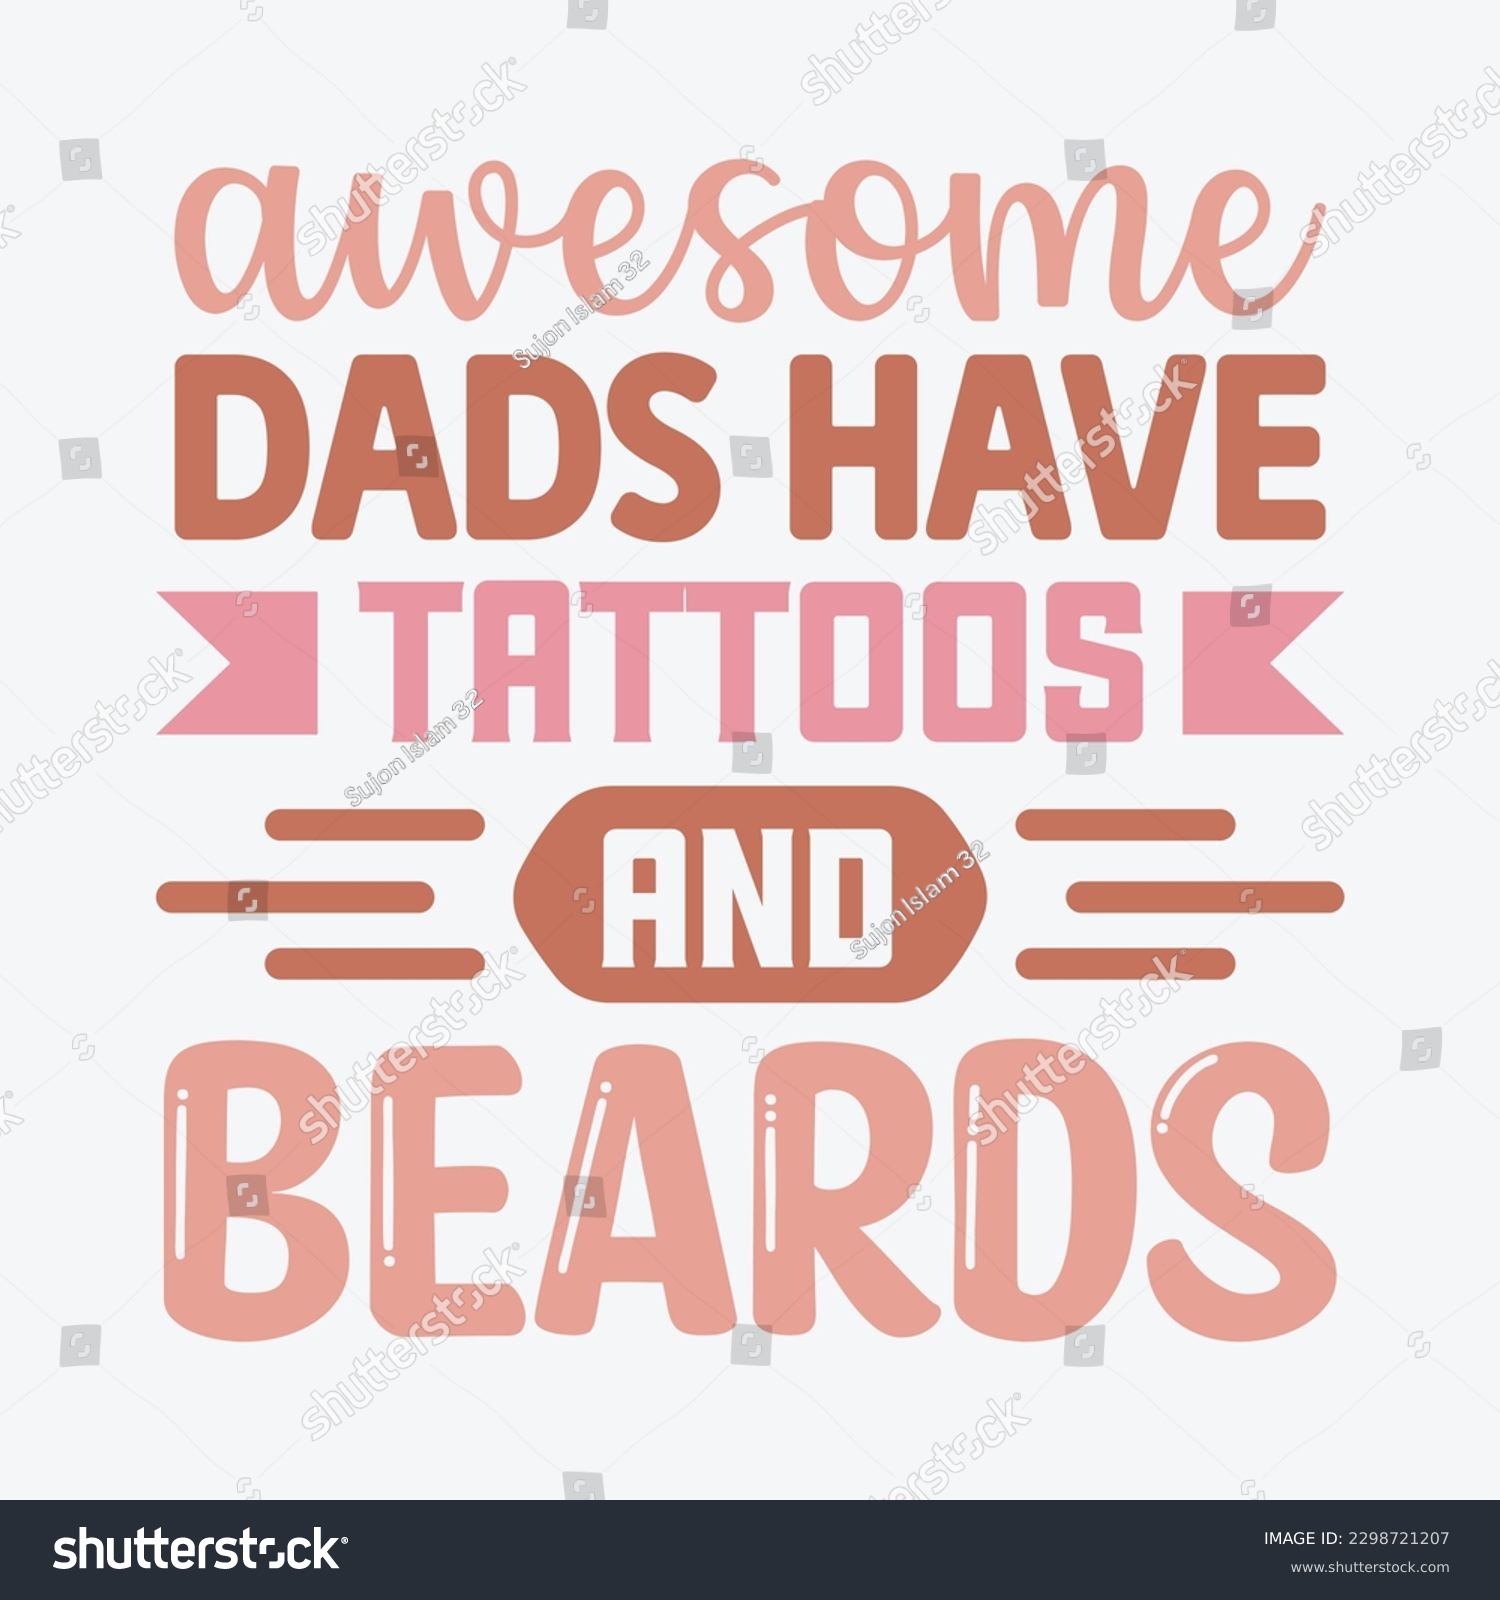 SVG of Awesome Dads Have Tattoos and Beards  Dad SVG, T-shirt design, Vector File  svg